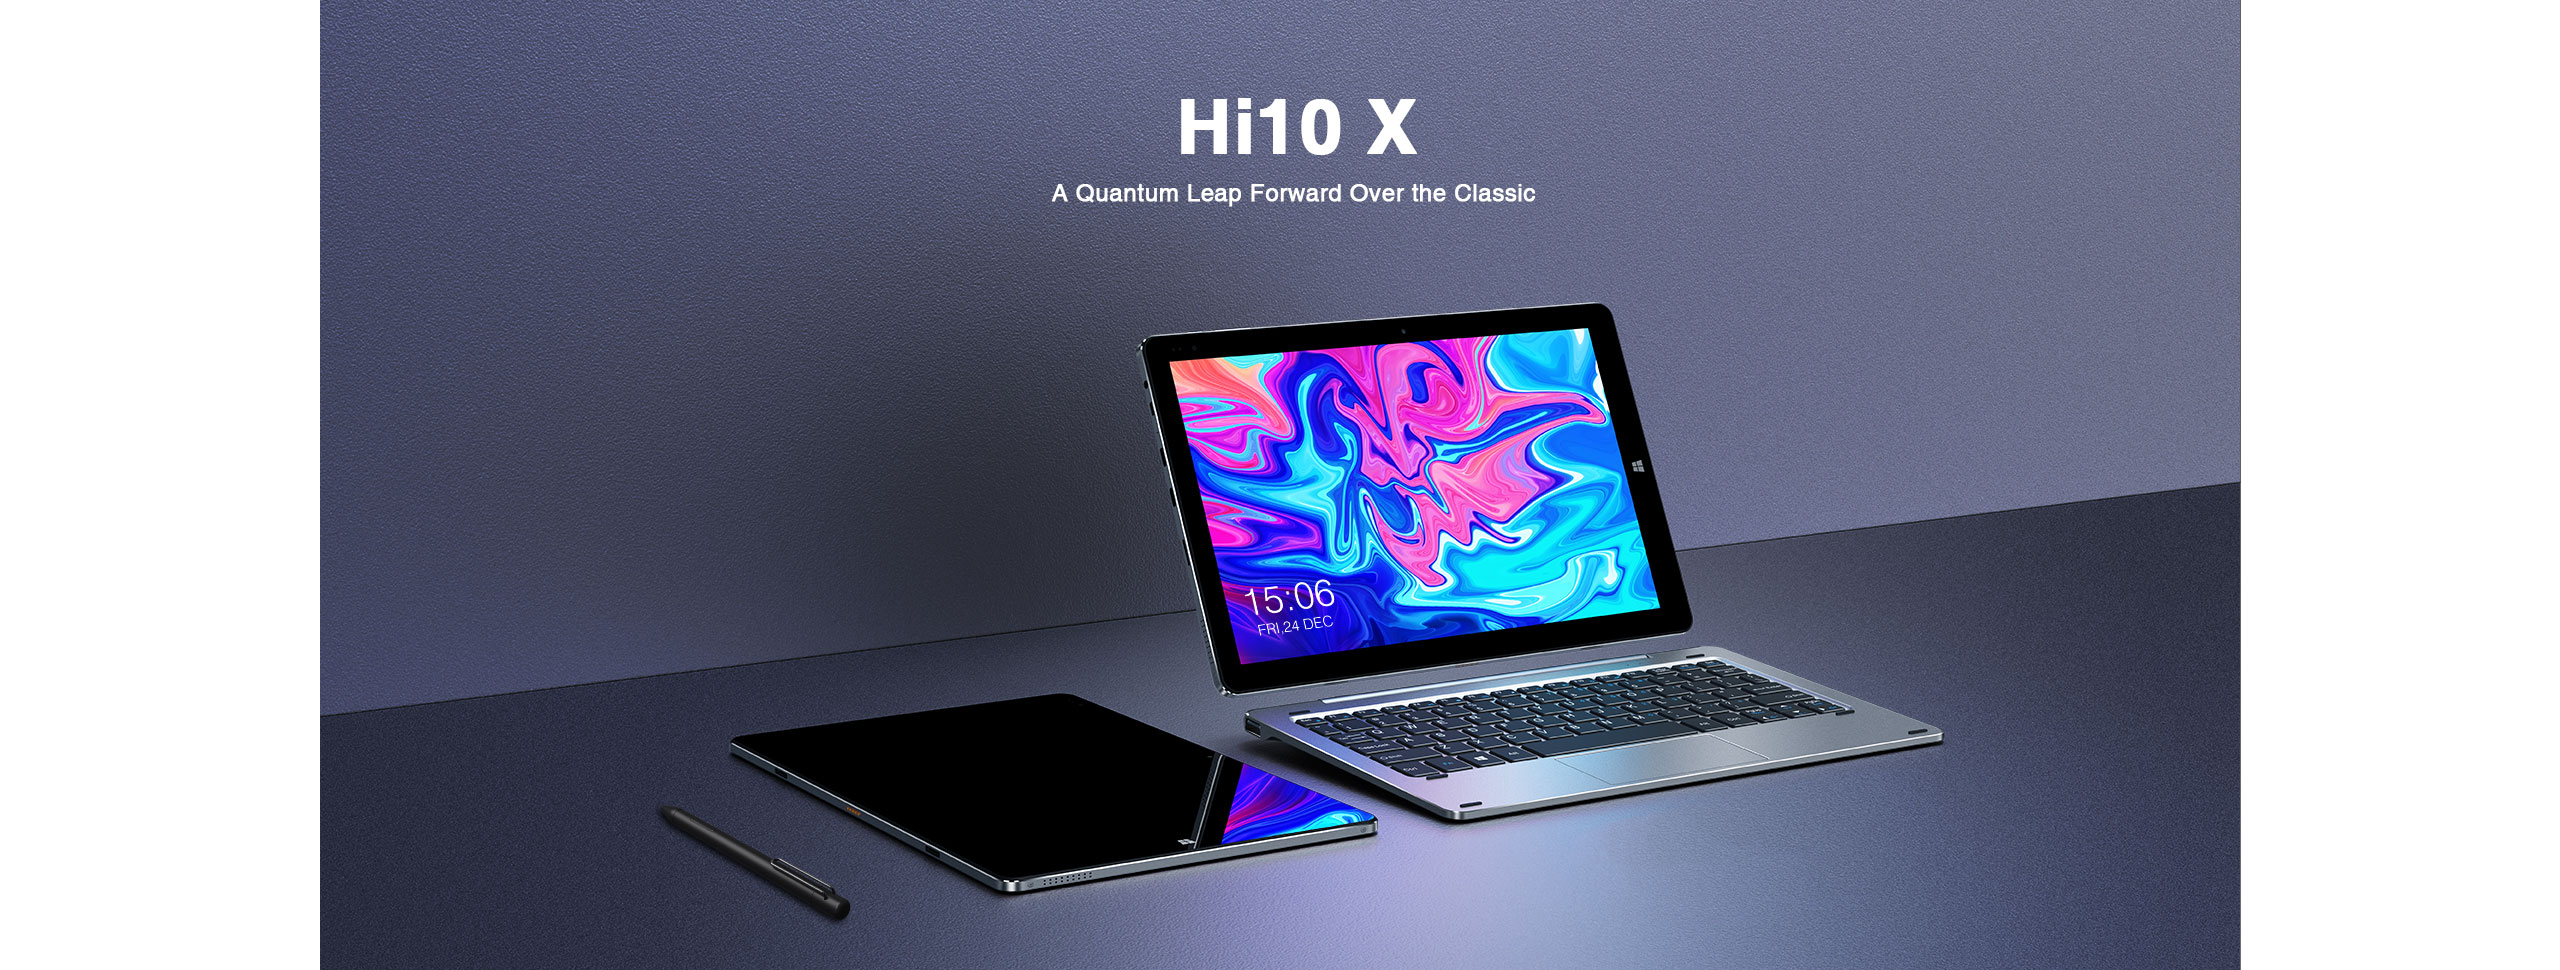 PC/タブレット ノートPC Hi10 X-Tablet PC-Products-Chuwi Official -Laptop, Android/Windows 